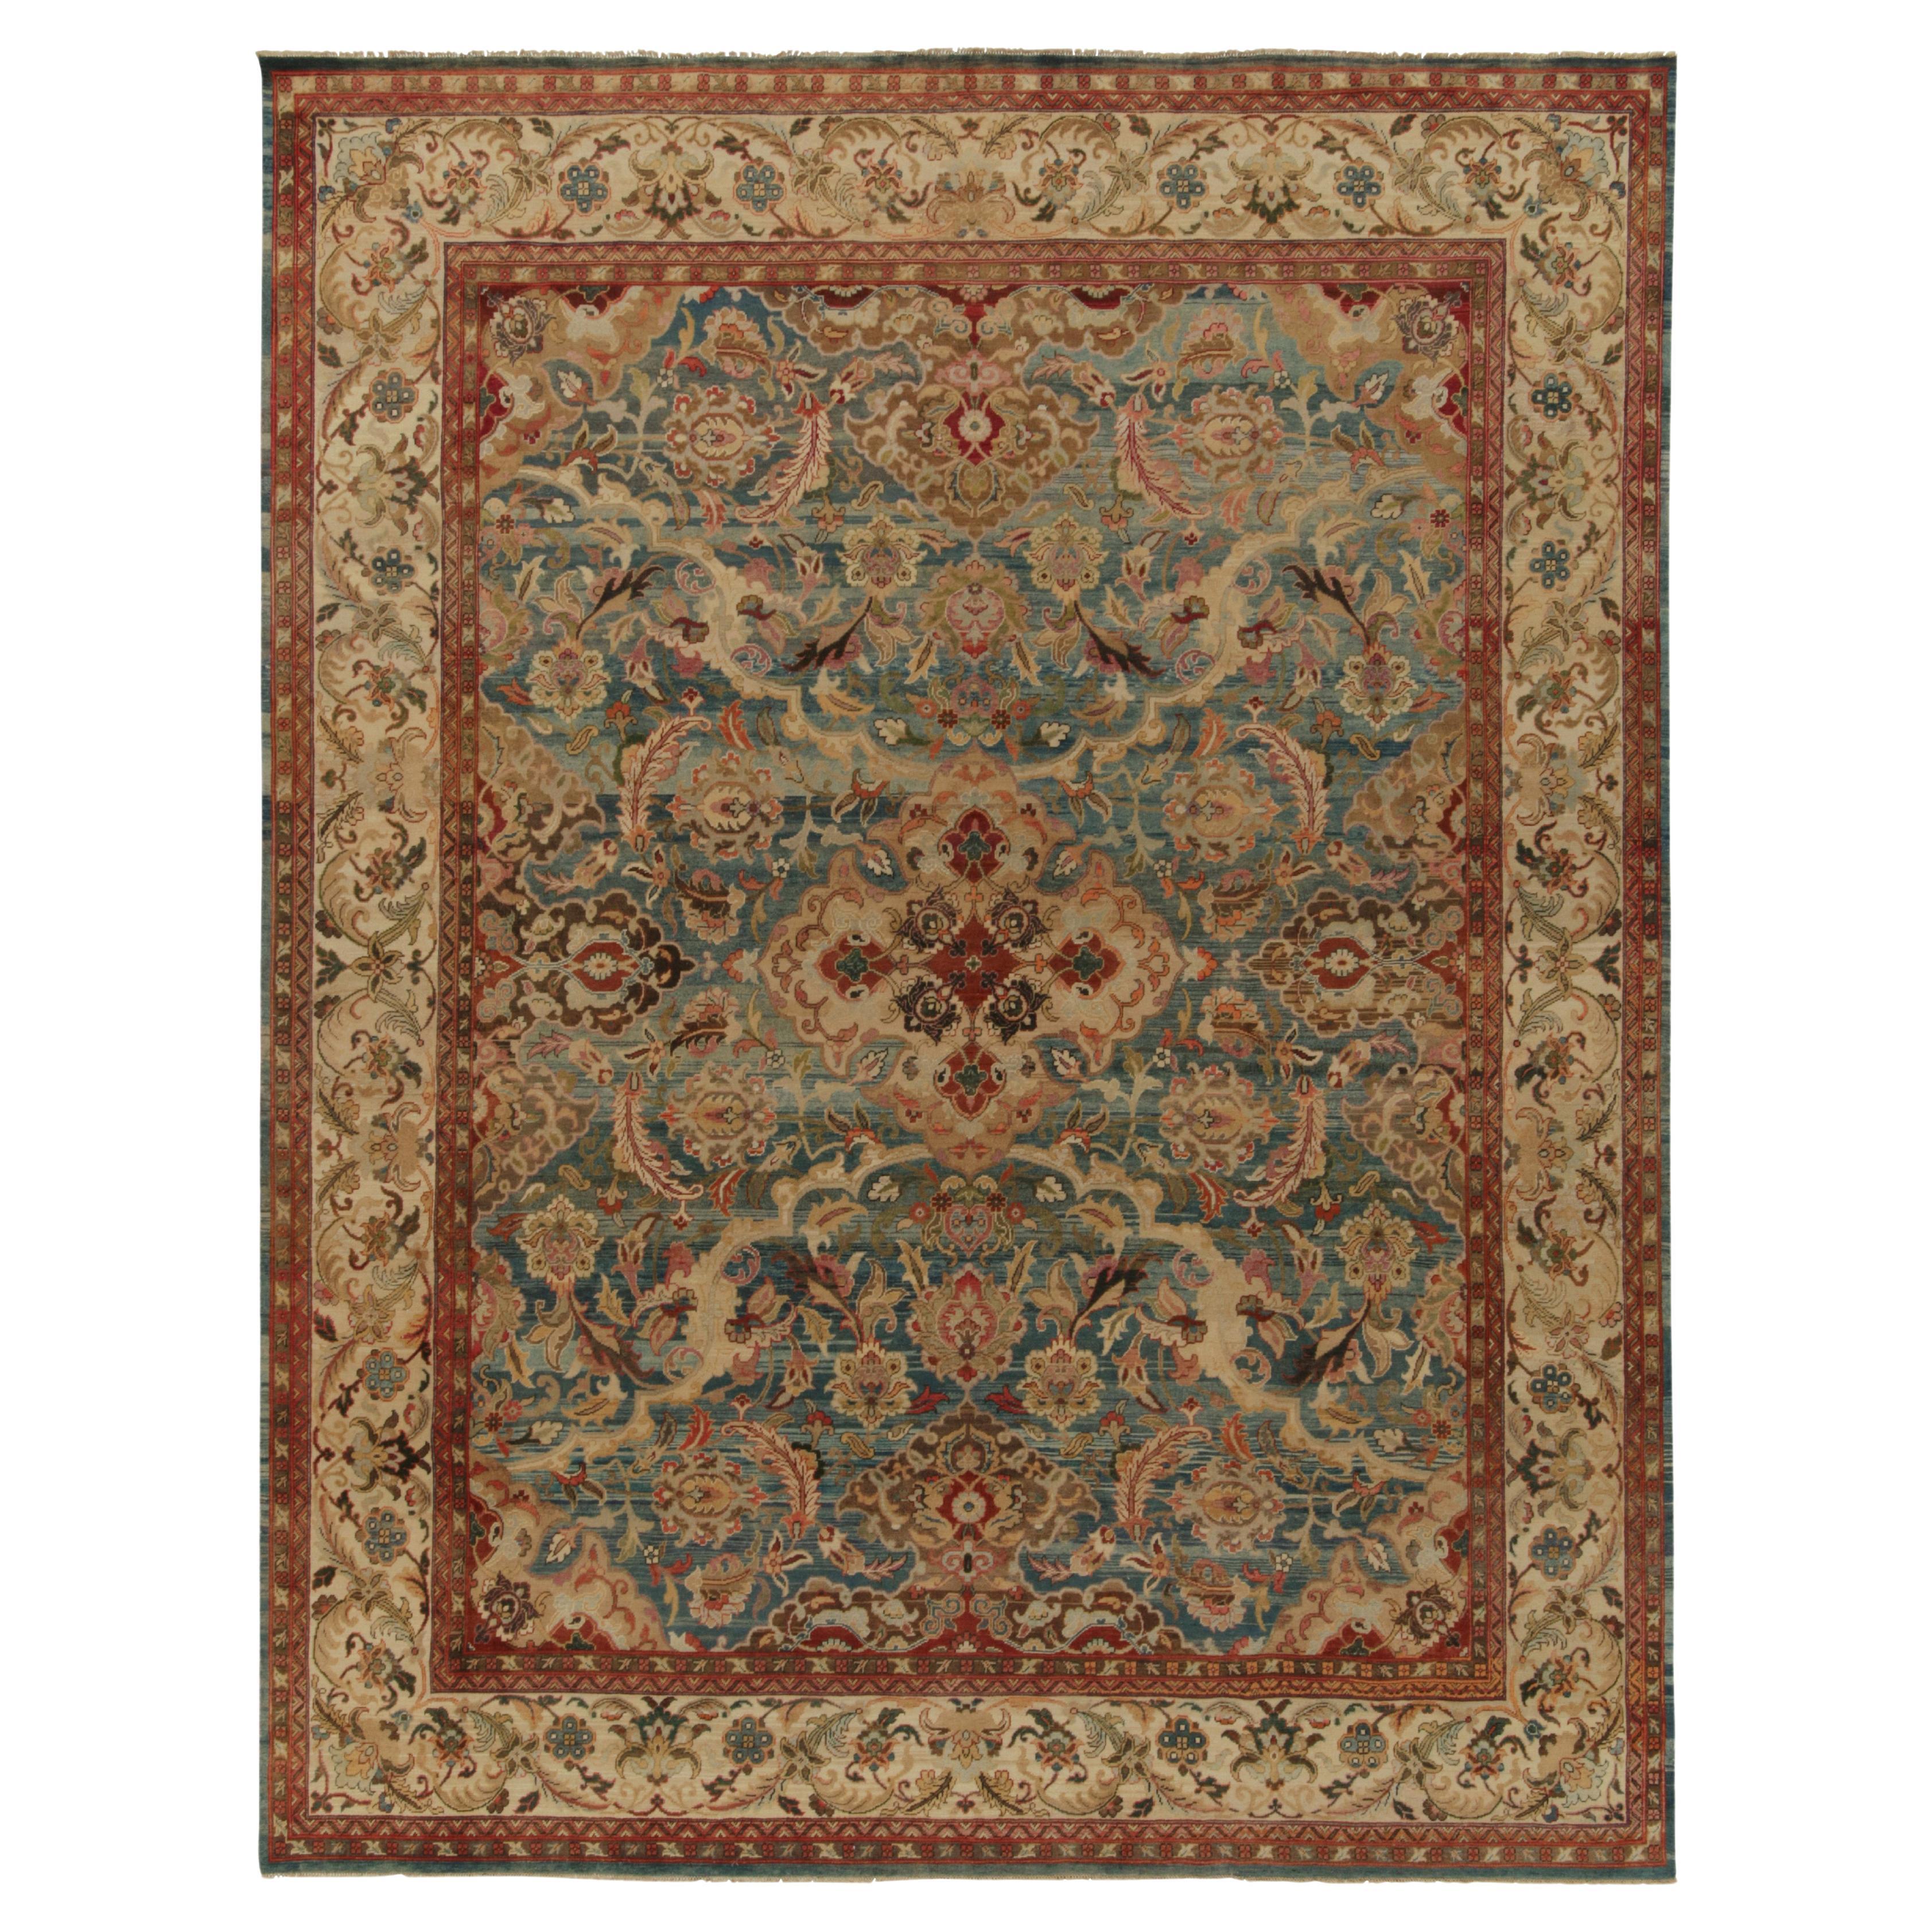 Rug & Kilim’s Classic Persian style rug in Blue and Beige-Brown Floral Patterns